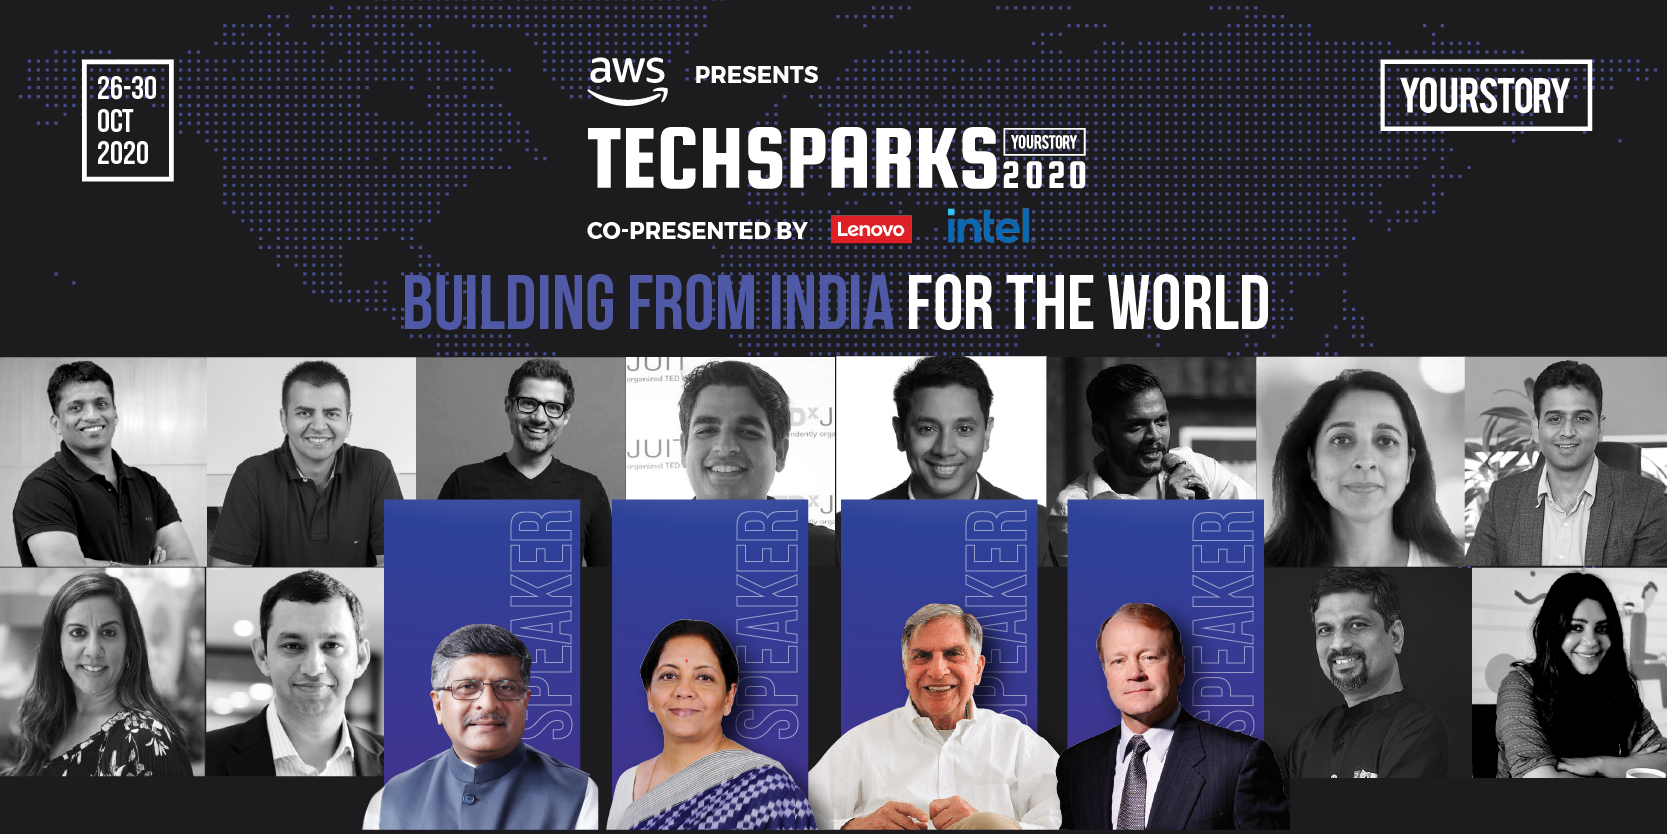 [TechSparks 2020] Building from India for the world: India’s largest startup and tech conference is LIVE